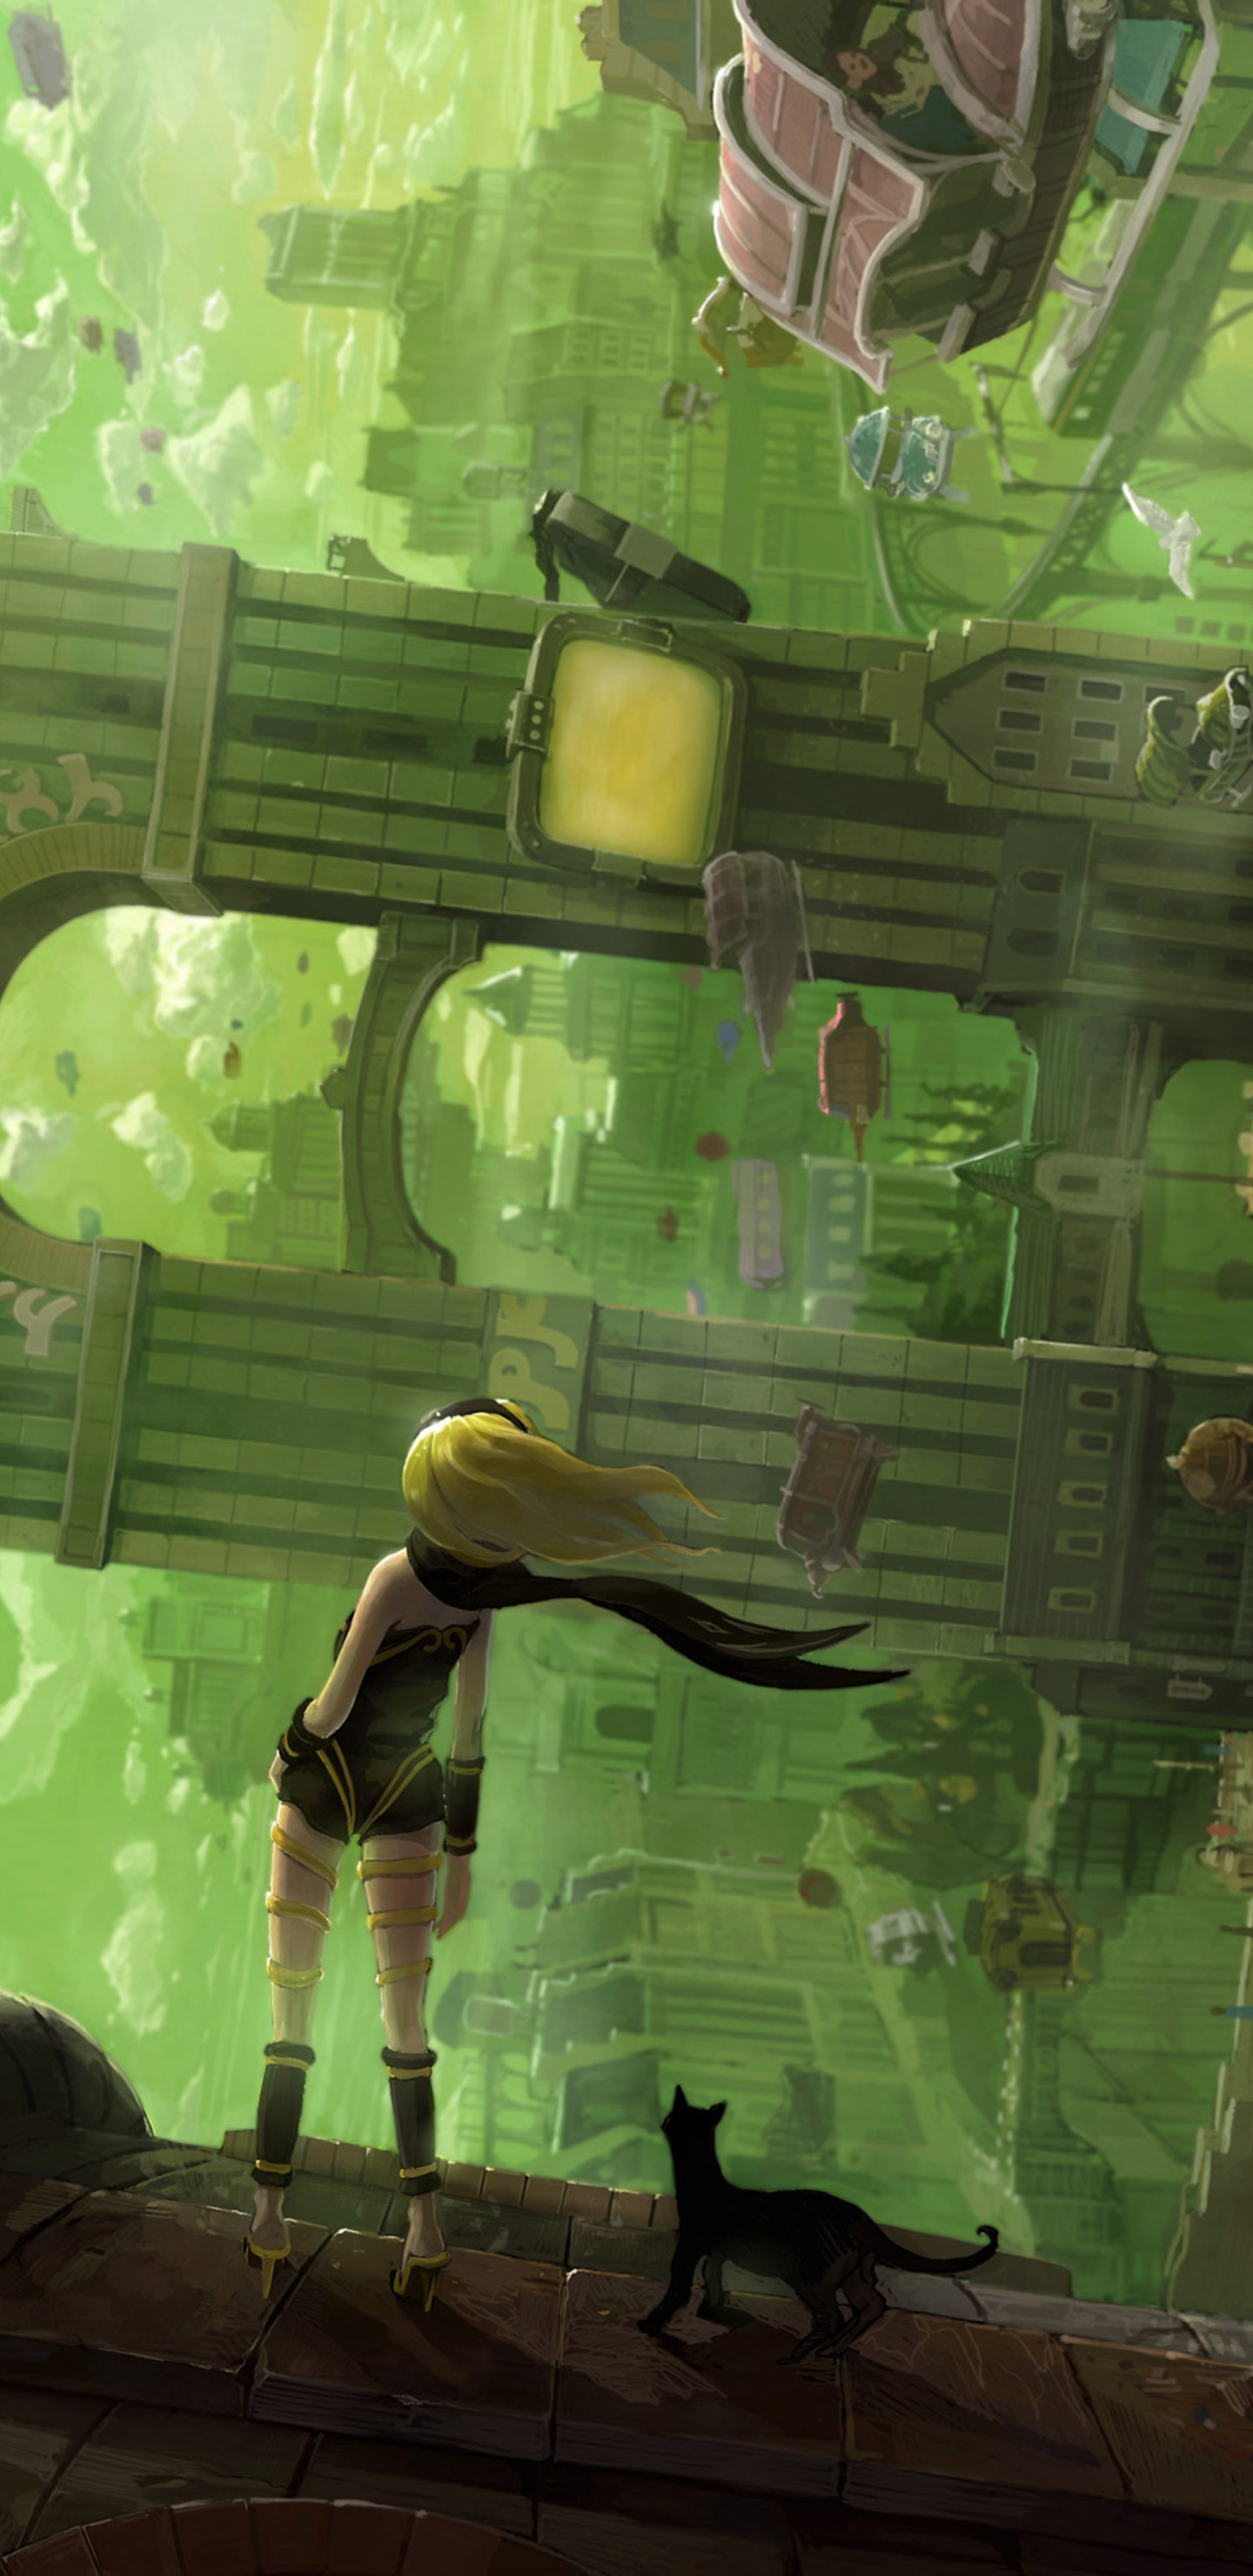 1440x2960 Gravity Rush 2 2017 Game 5k Samsung Galaxy Note 9,8, S9,S8,S8+  QHD HD 4k Wallpapers, Images, Backgrounds, Photos and Pictures